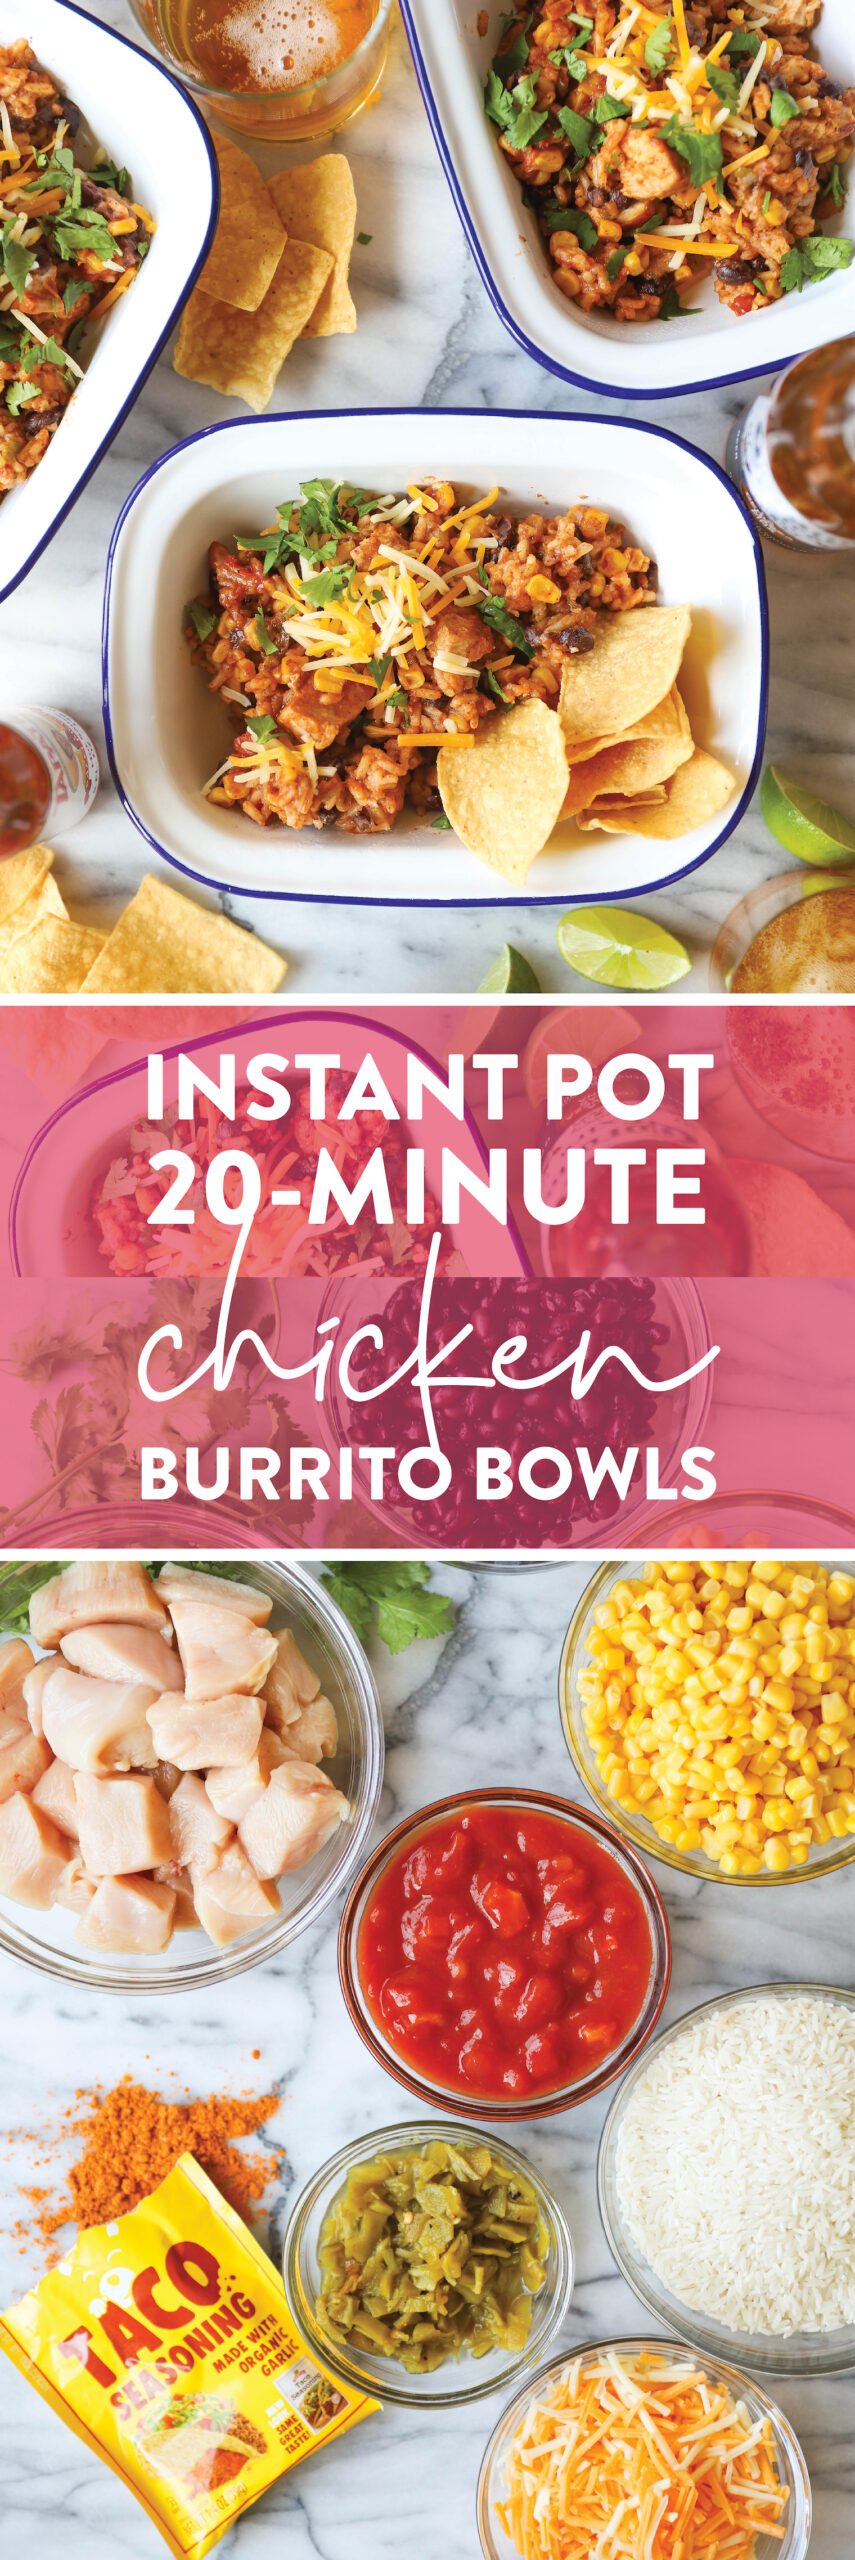 https://s23209.pcdn.co/wp-content/uploads/2018/02/Instant-Pot-Chicken-Burrito-Bowls-1-scaled.jpg